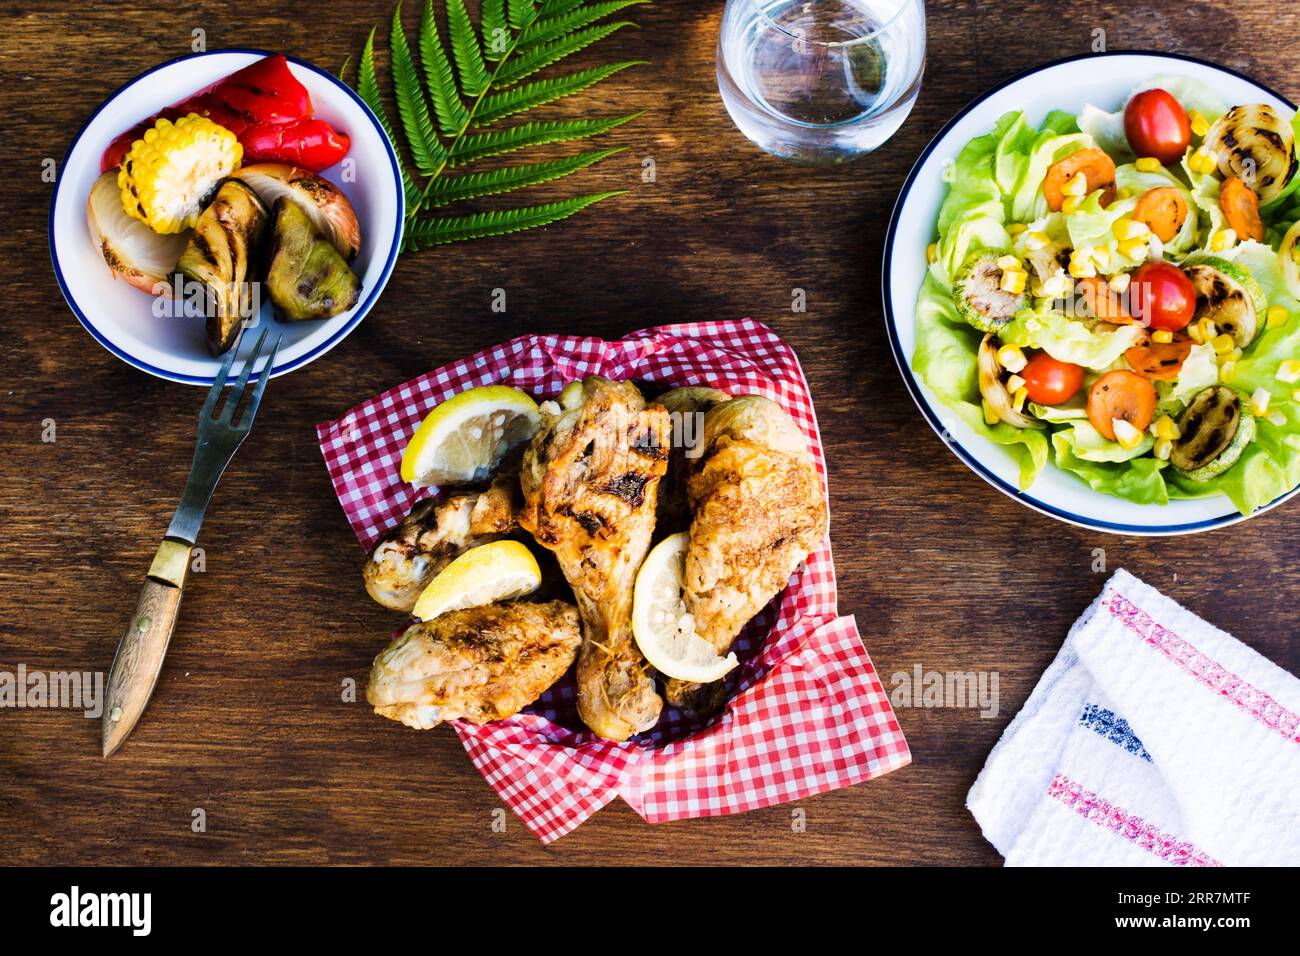 Grilled chicken legs with lemon salad Stock Photo